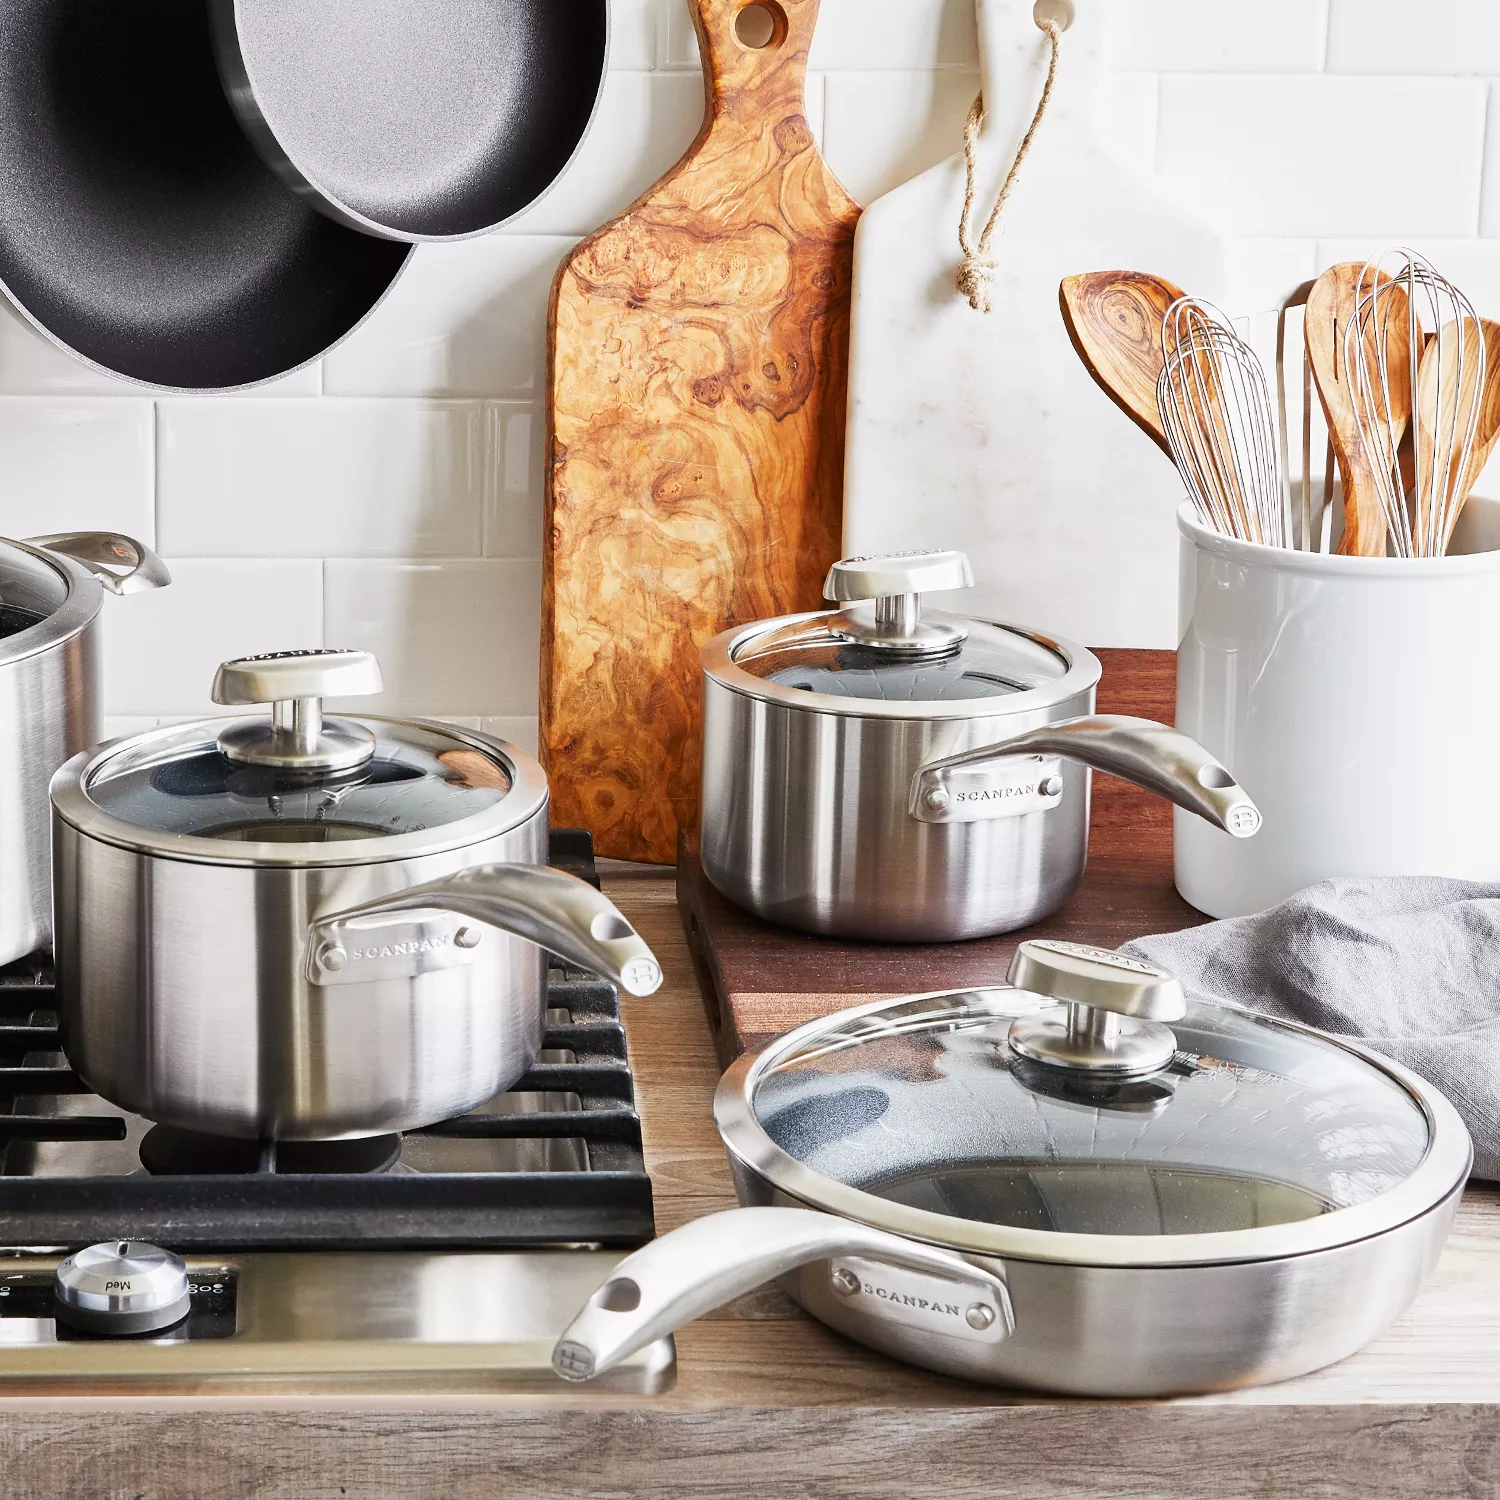 Le Creuset 10-Piece Stainless Steel Set